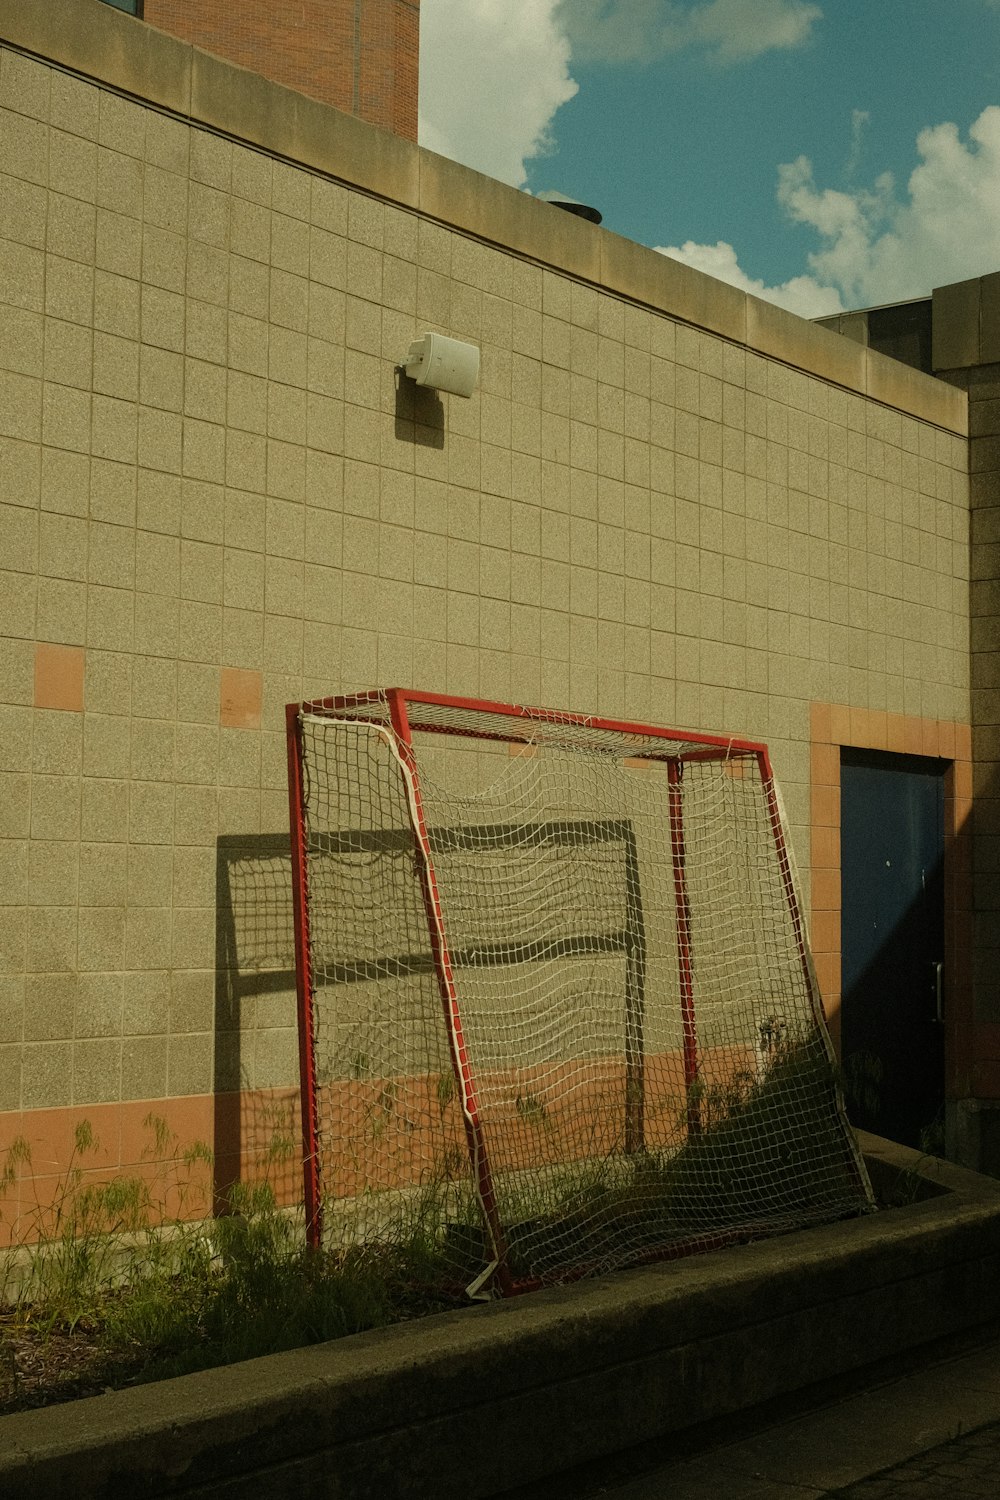 a soccer goal and net in front of a building